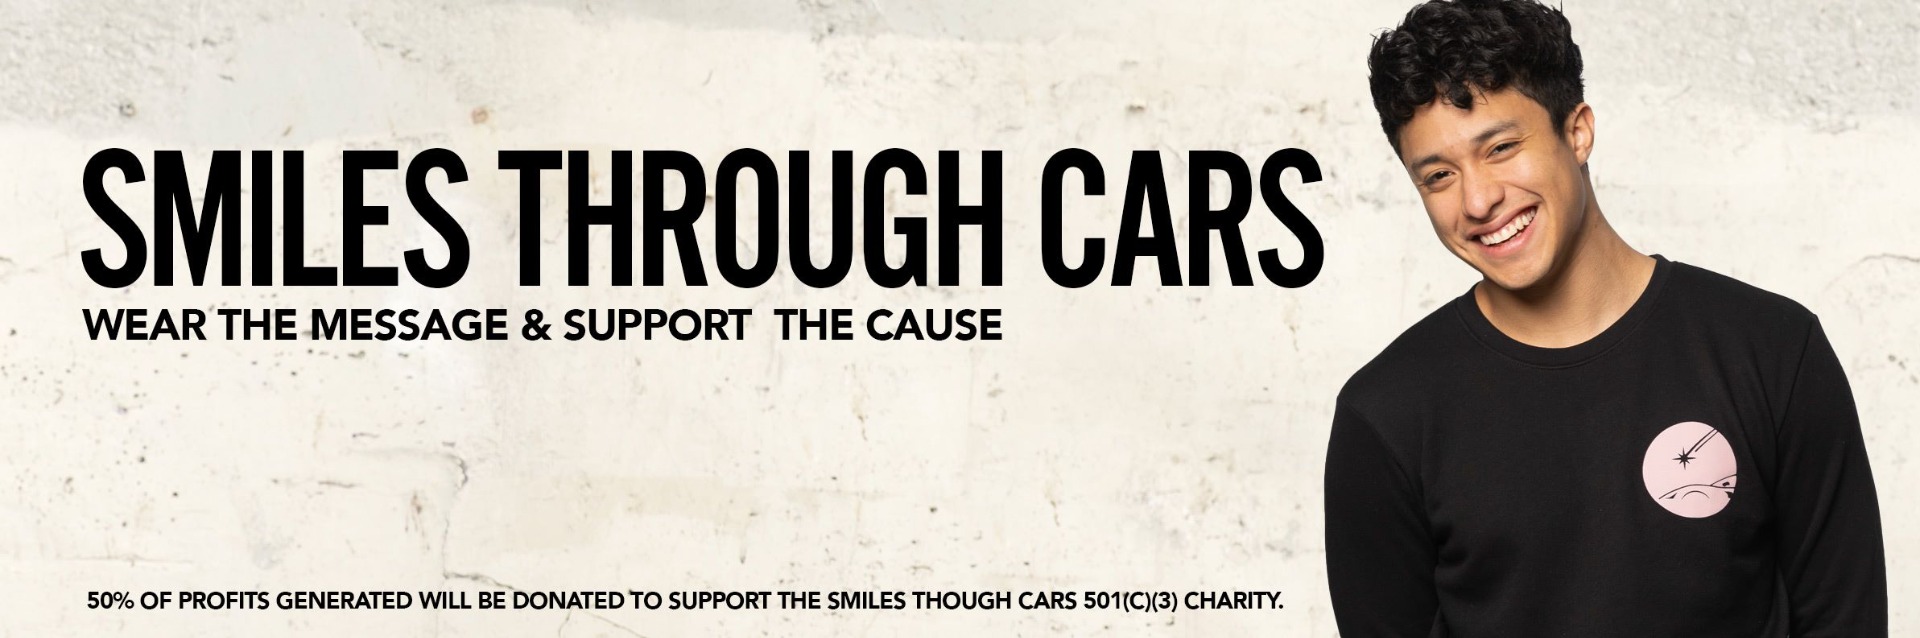 Smiles Through Cars Charity